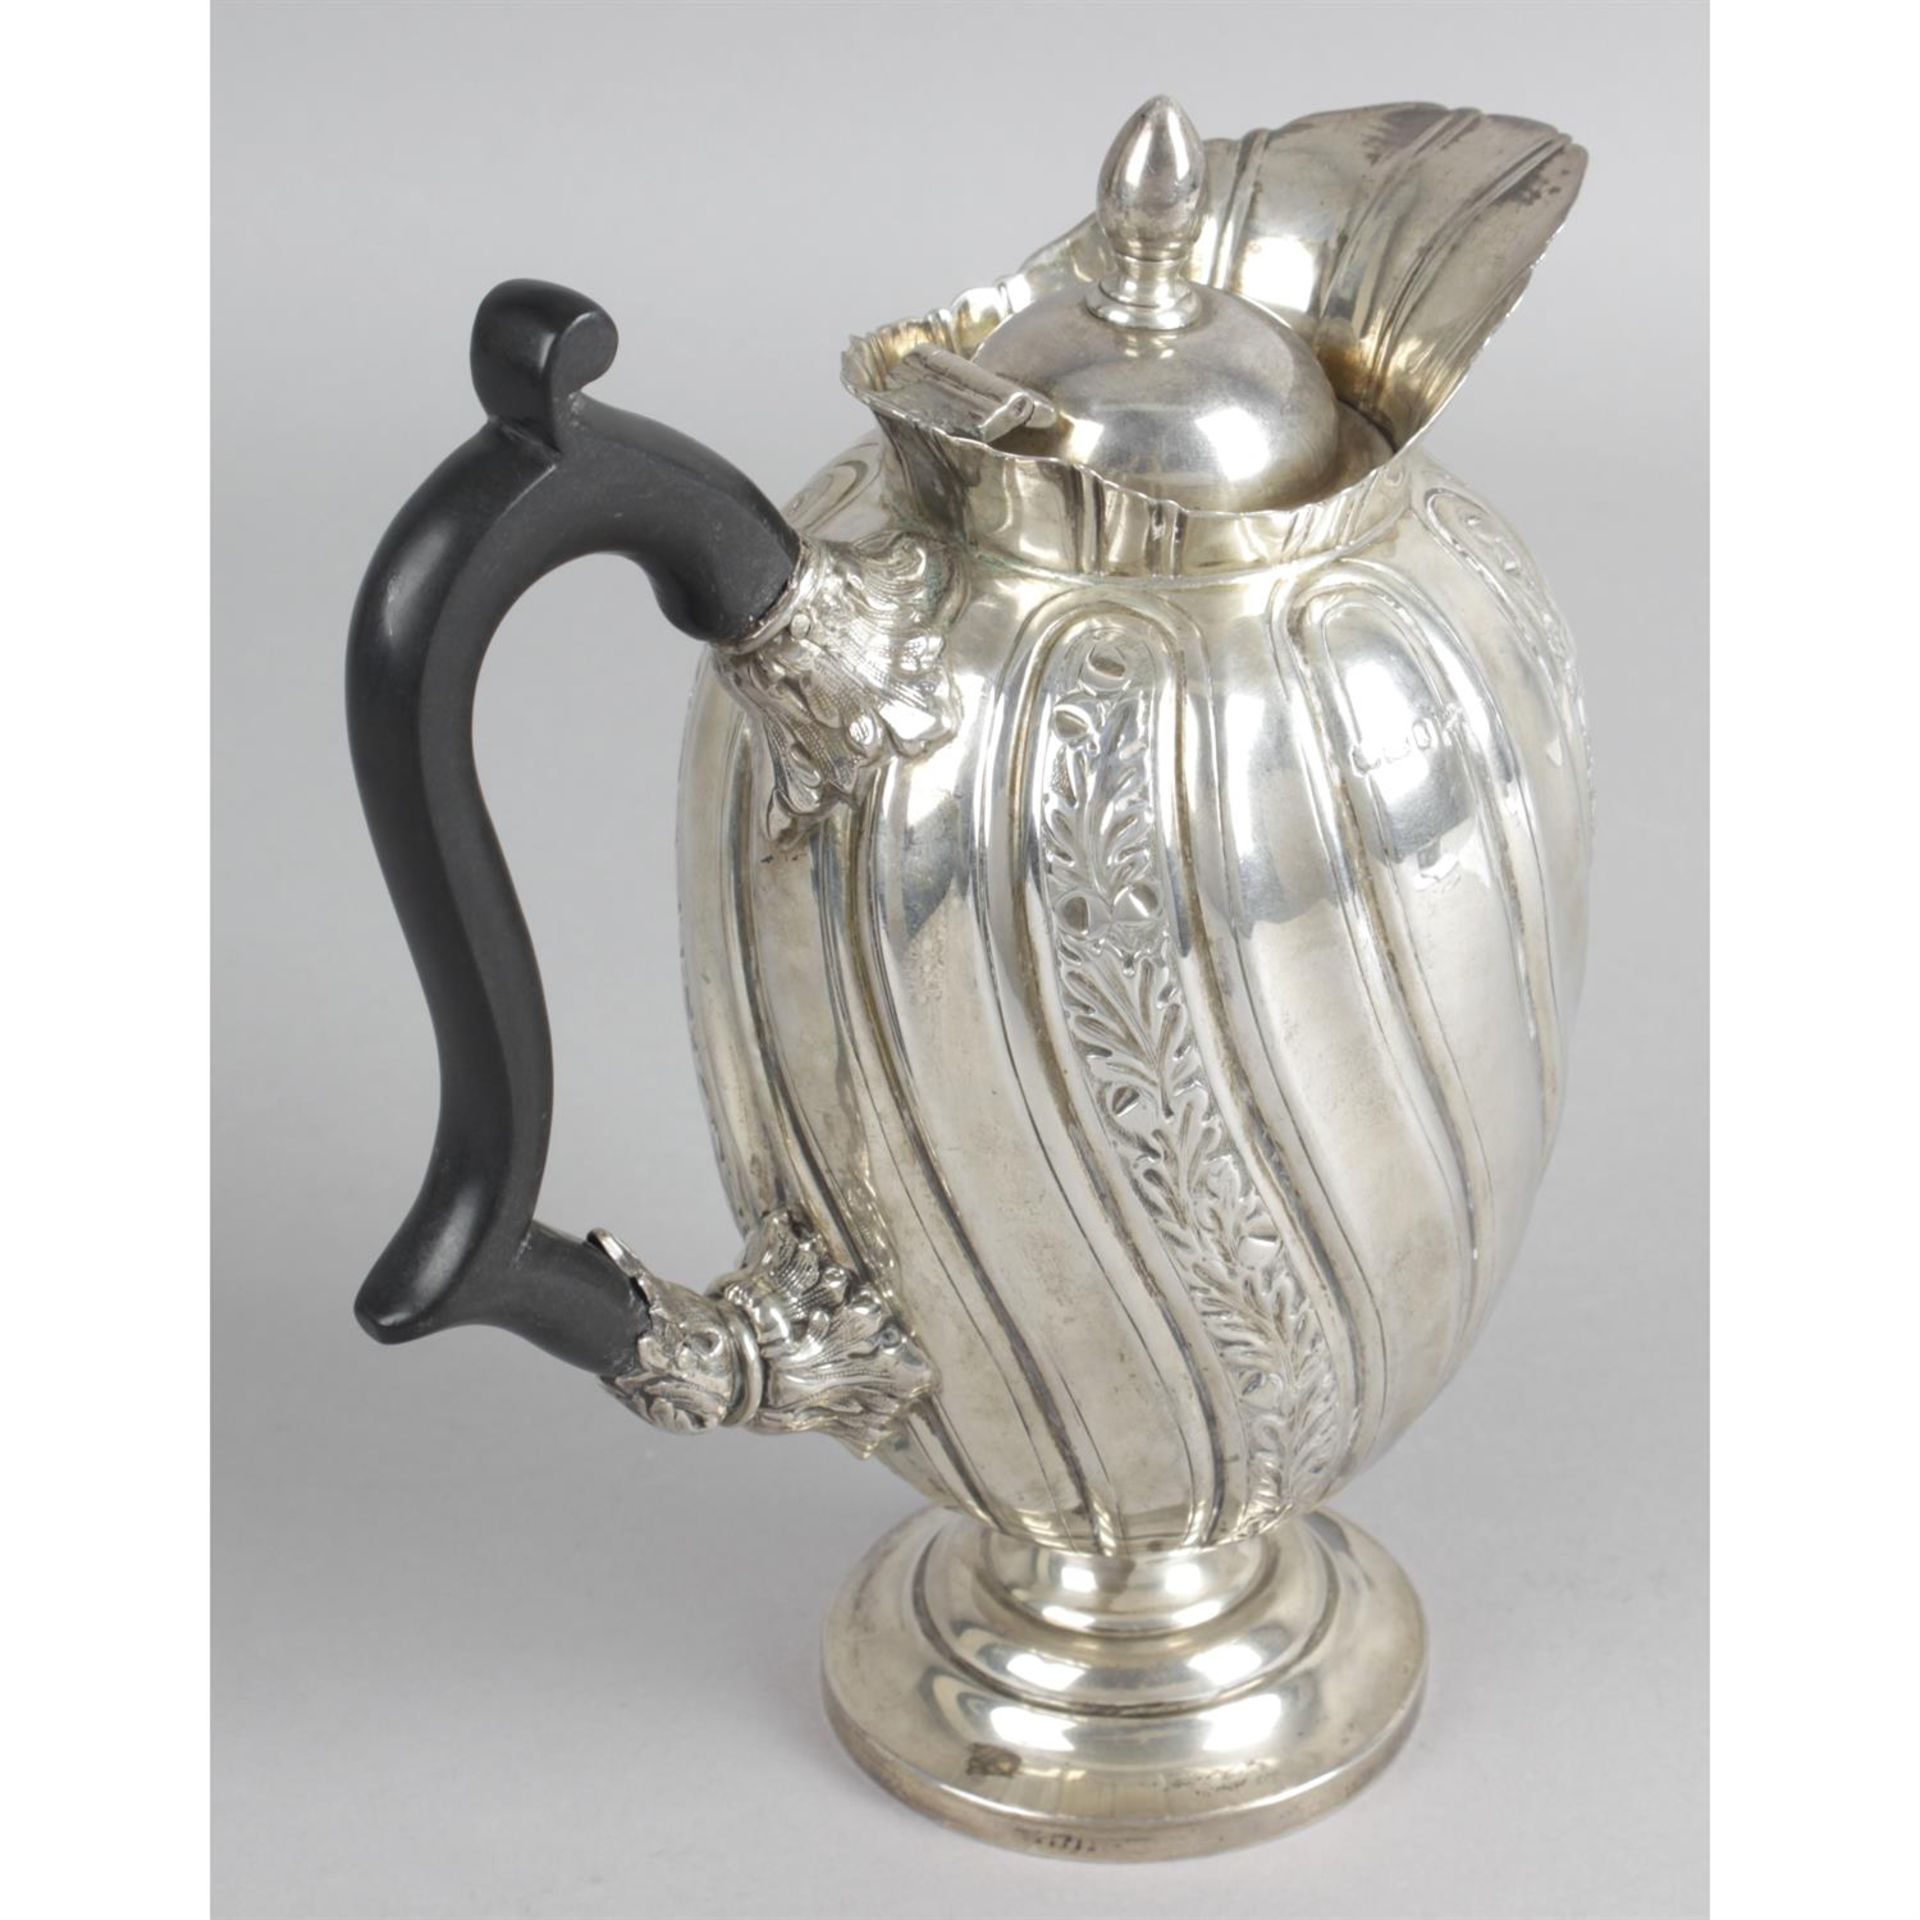 A late Victorian silver lidded jug or ewer, by Walker & Hall. - Image 2 of 3